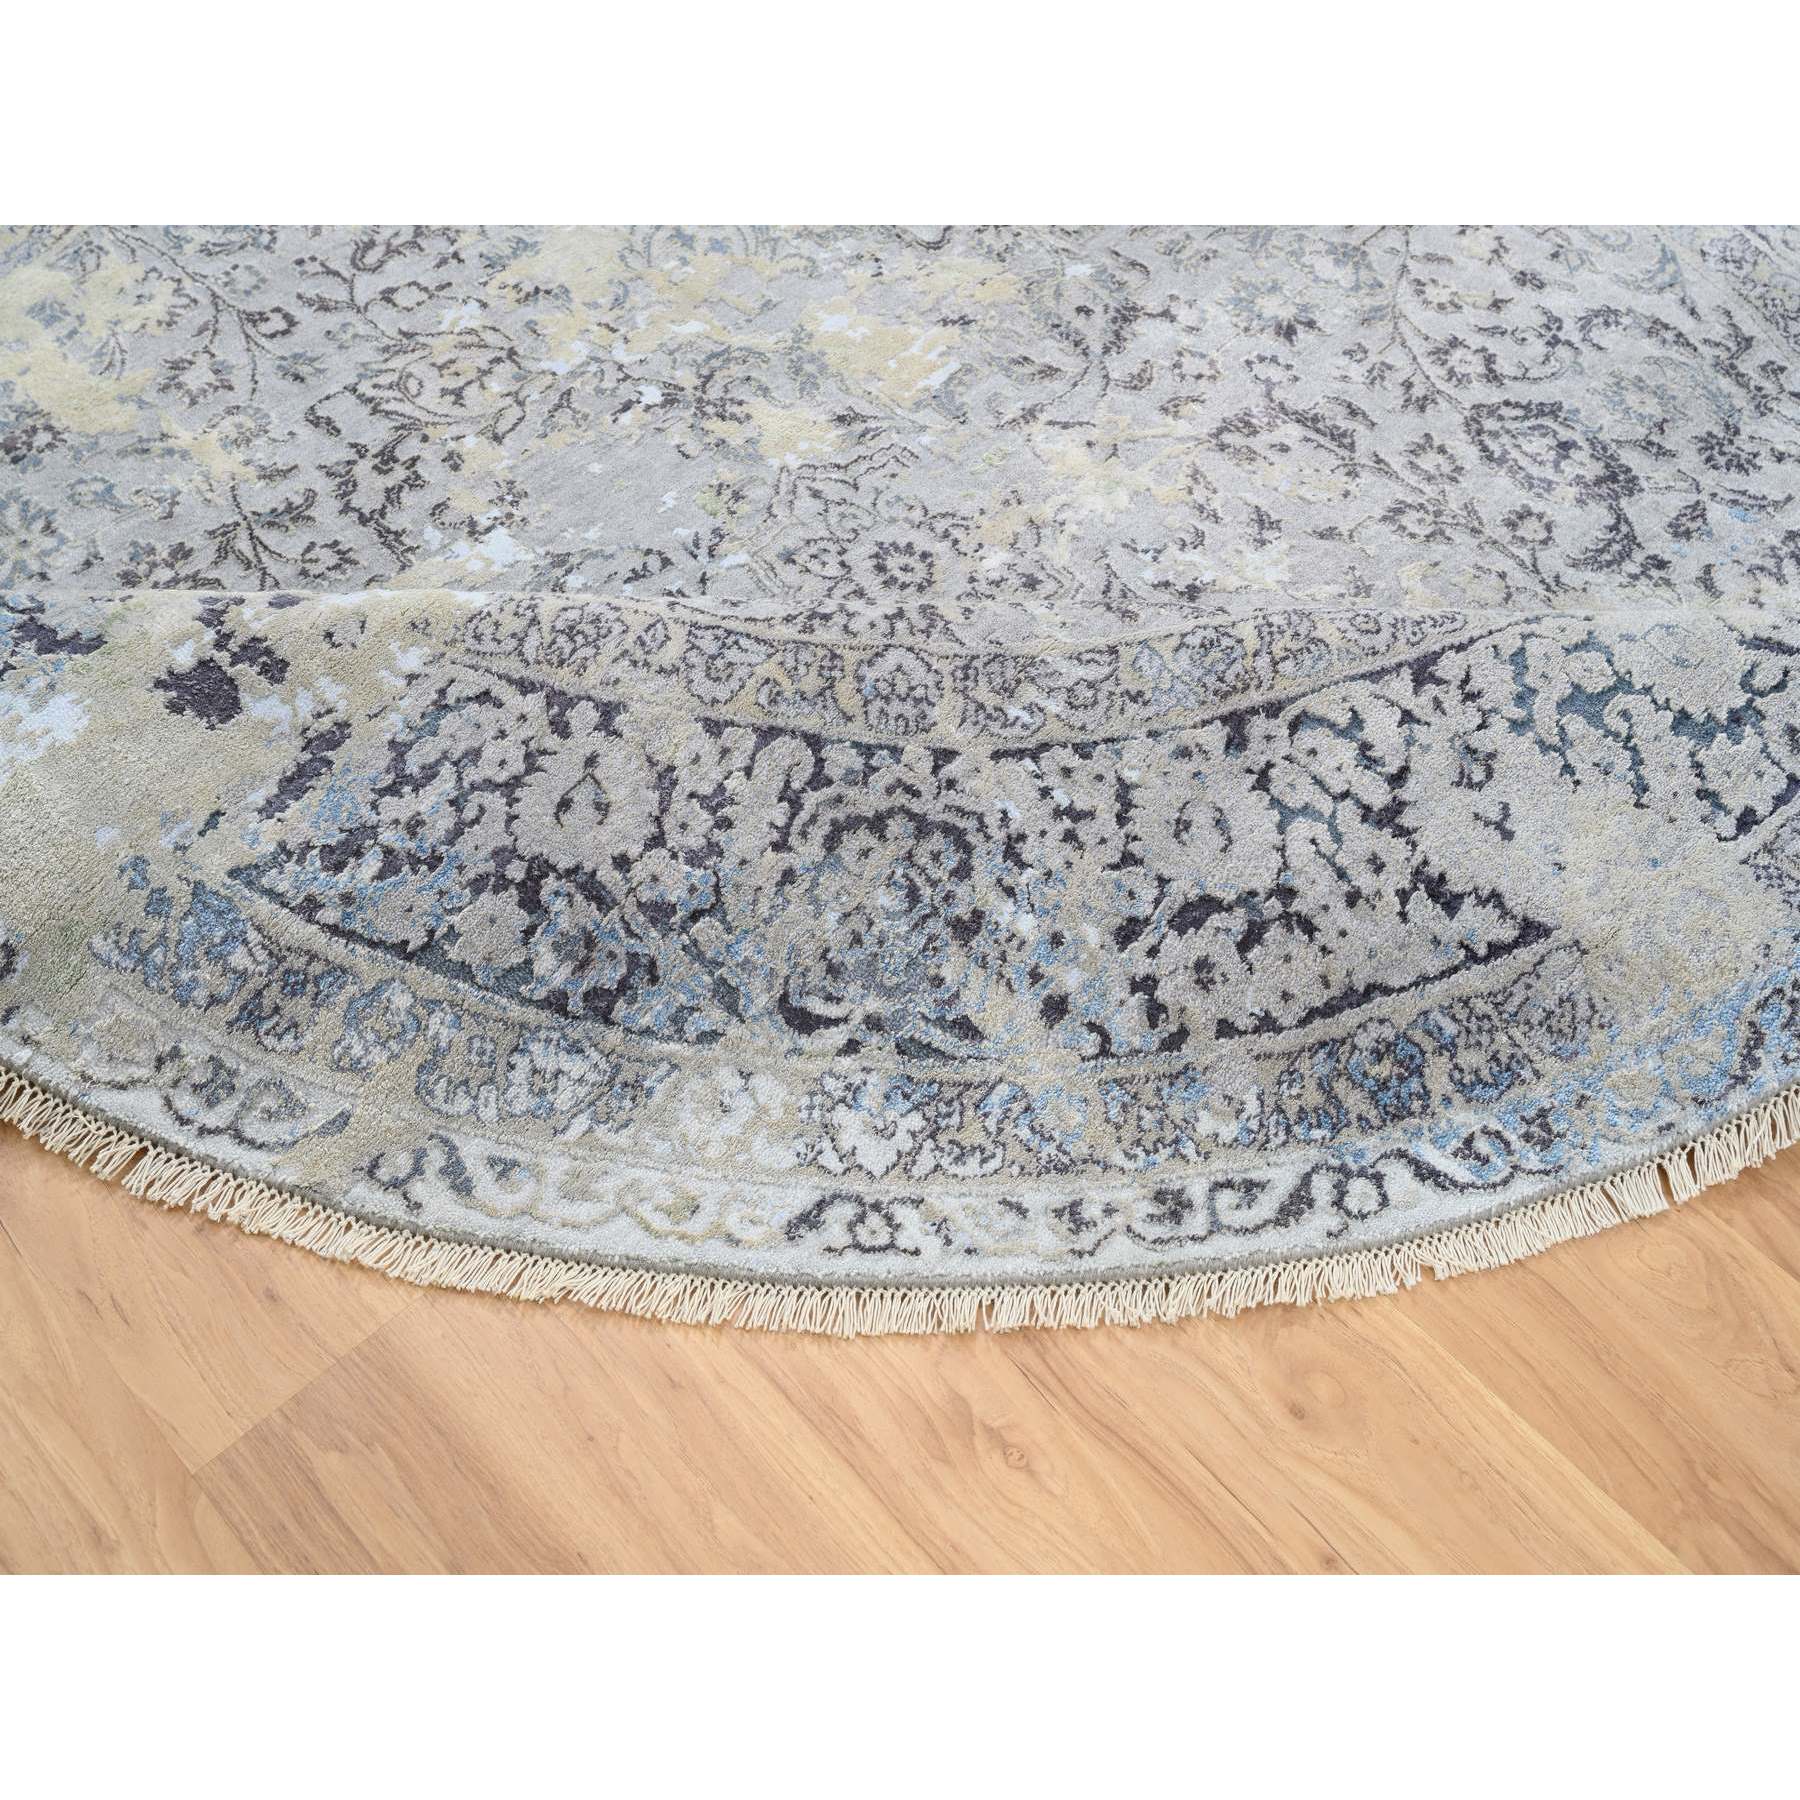 8'1"x8'1" Gray and Blue, Broken Kashan Design, Wool With Pure Silk Hand Woven, Round Oriental Rug 